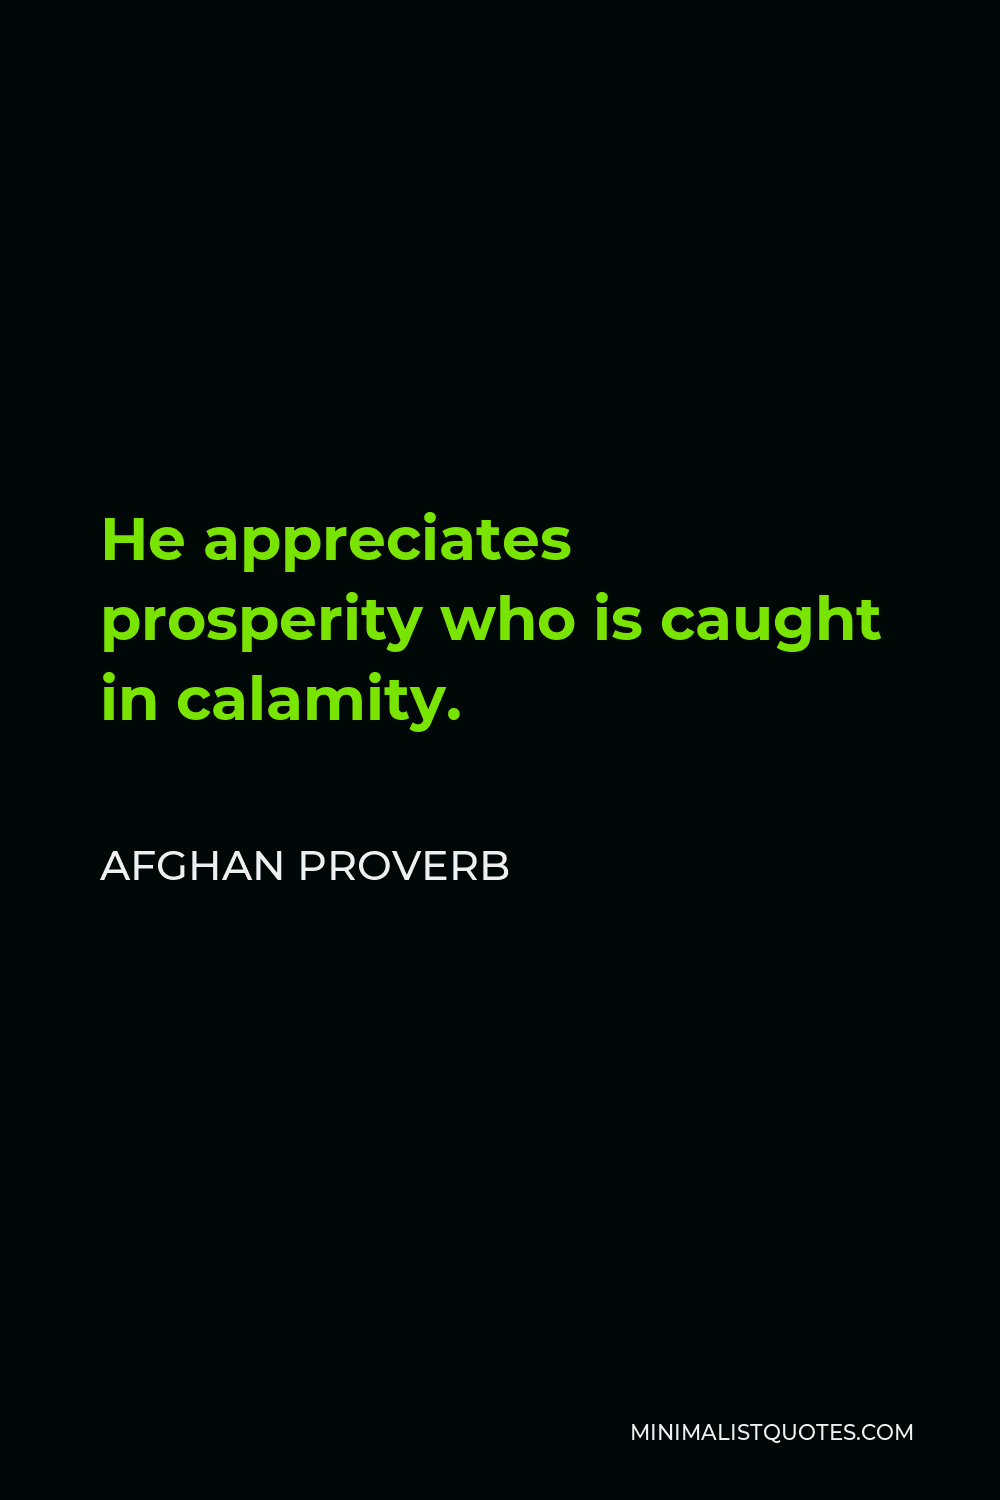 Afghan Proverb Quote - He appreciates prosperity who is caught in calamity.